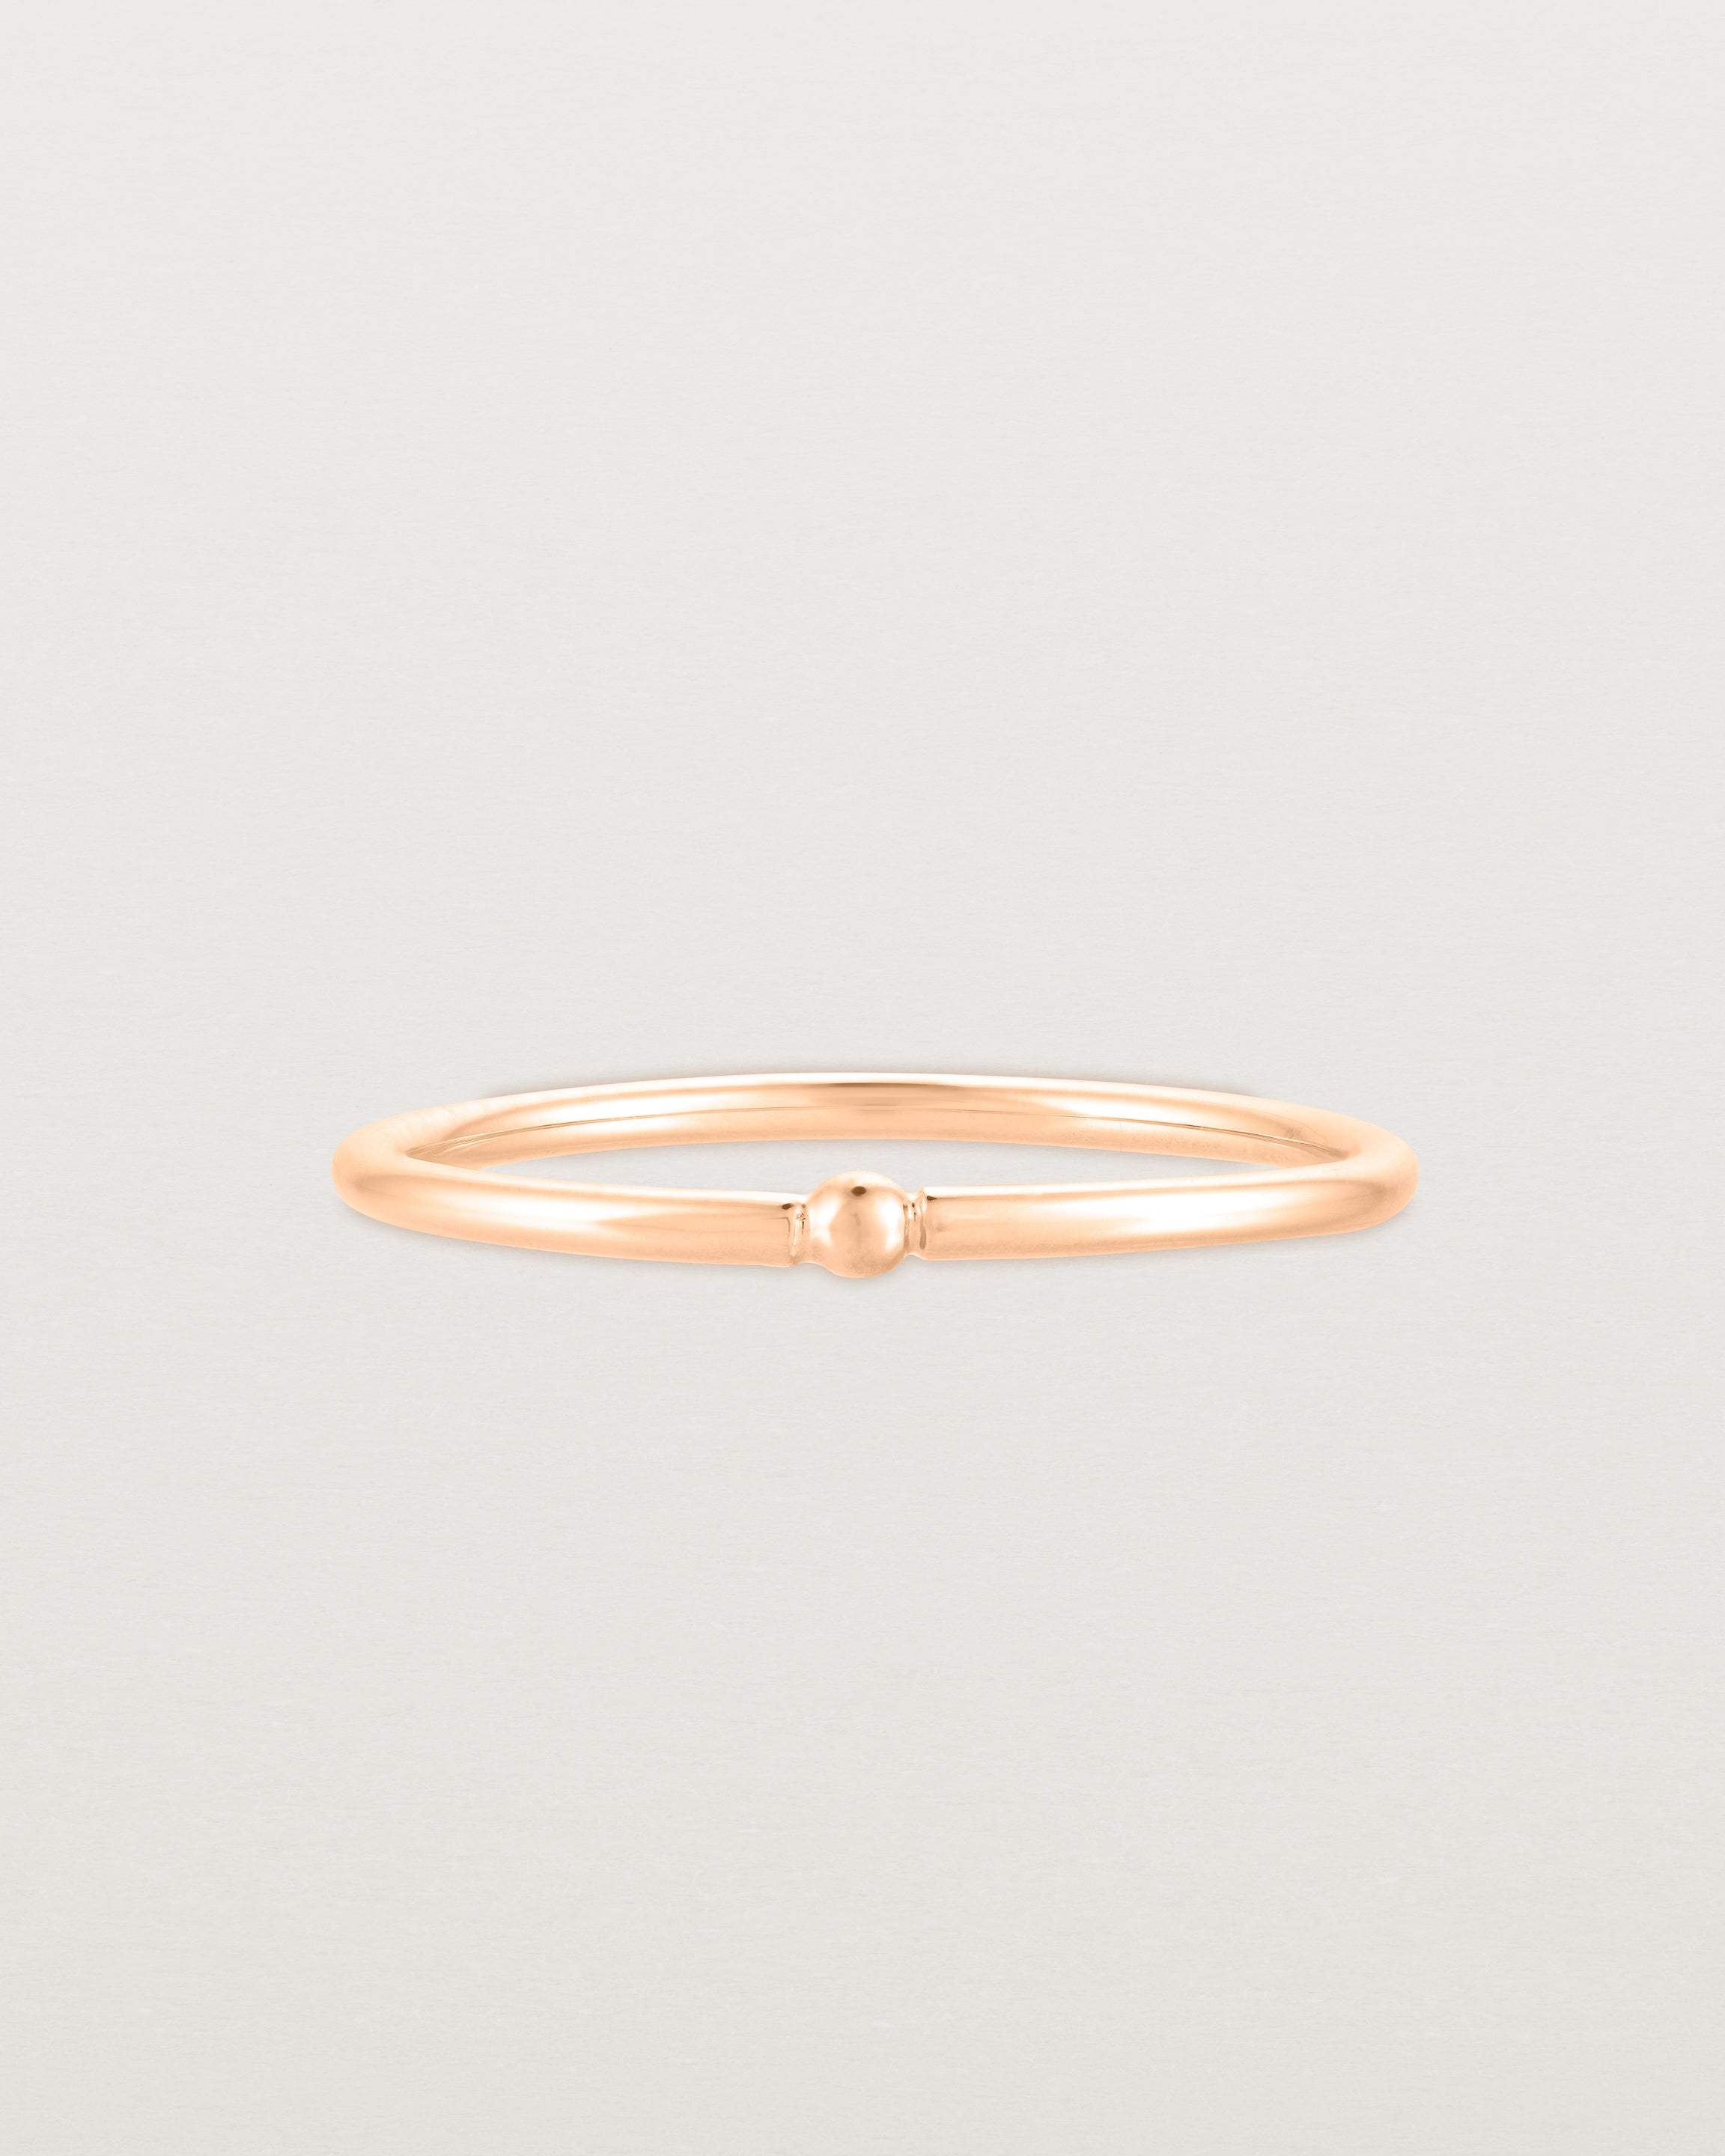 Front view of the Suspend Ring in Rose Gold.